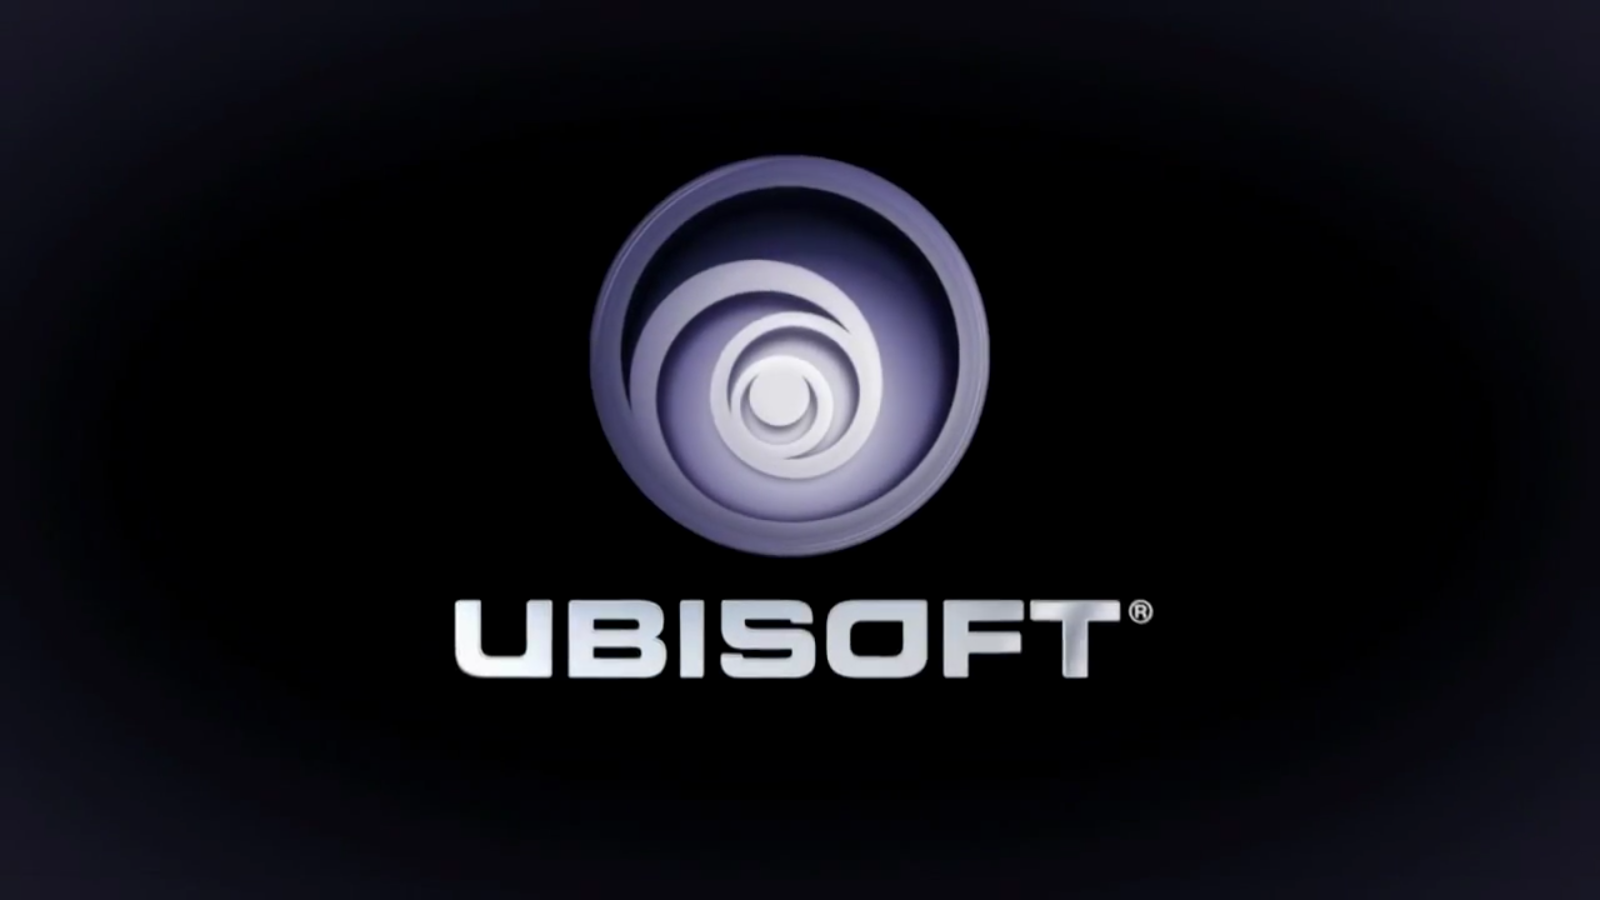 Ubisoft Releases Sales and Earnings for First Half of 2015/16